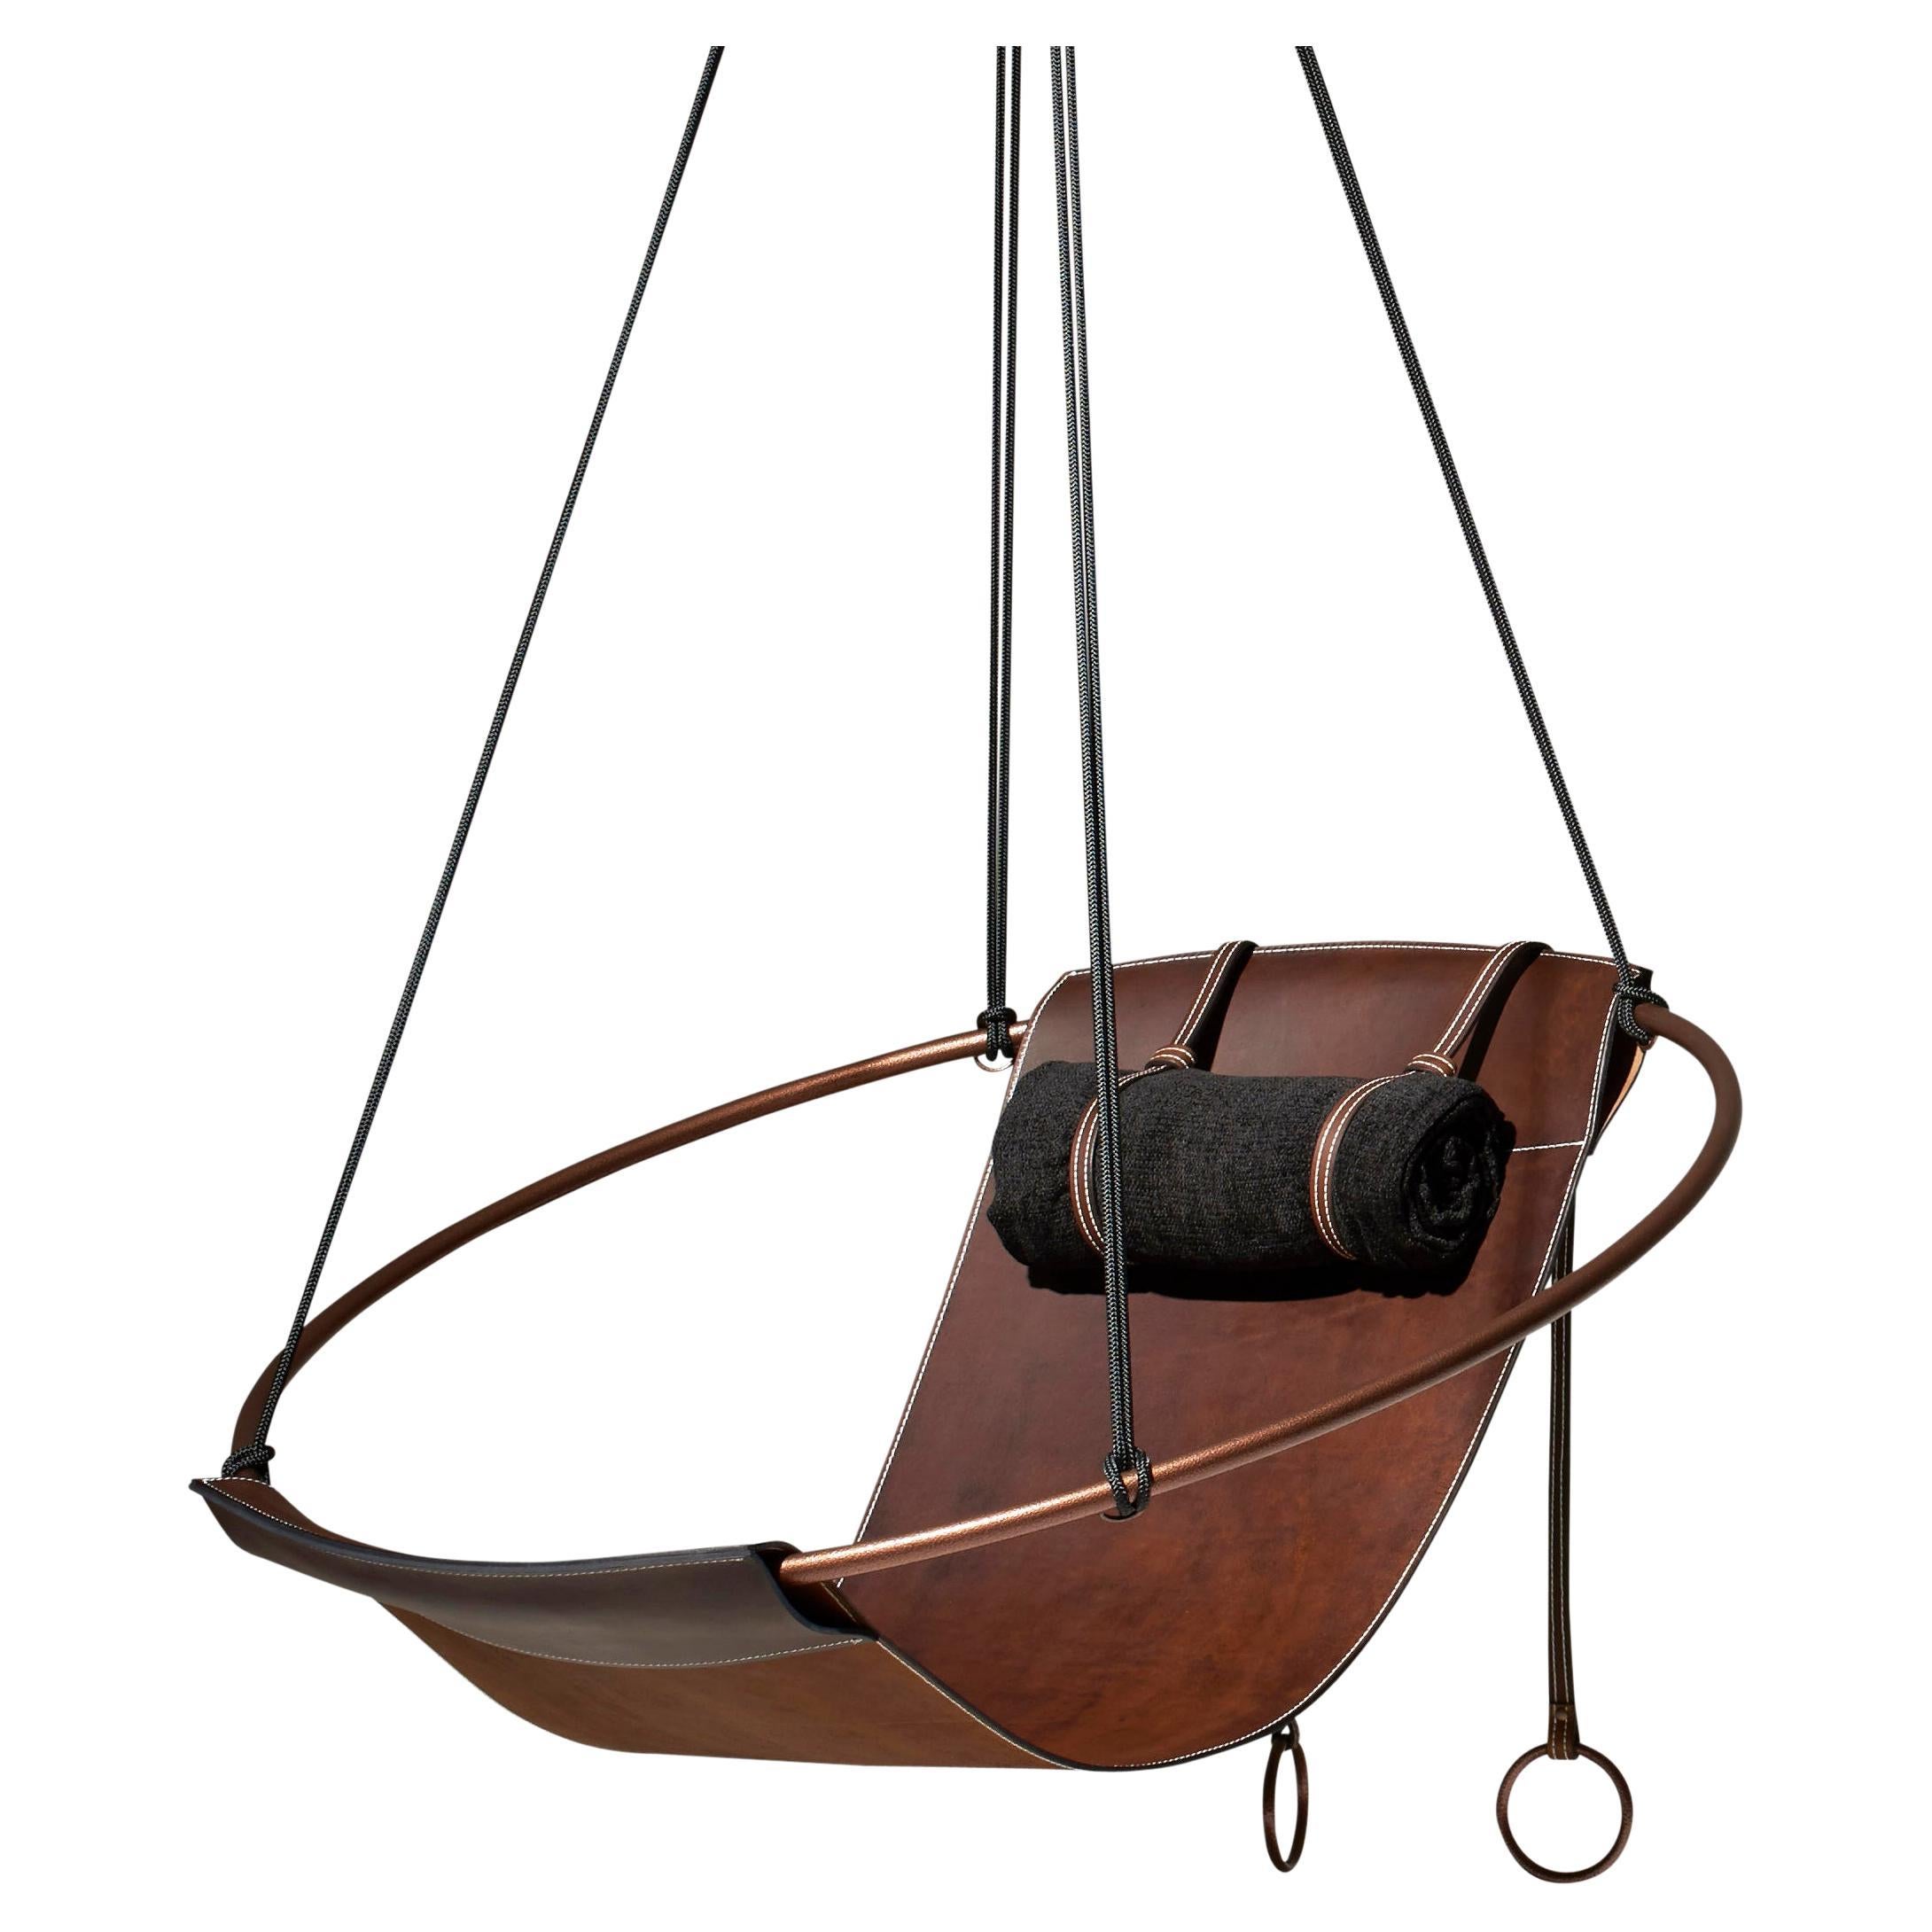 Modern, Rustic African Leather Hanging Sling Swing Chair For Sale at 1stDibs